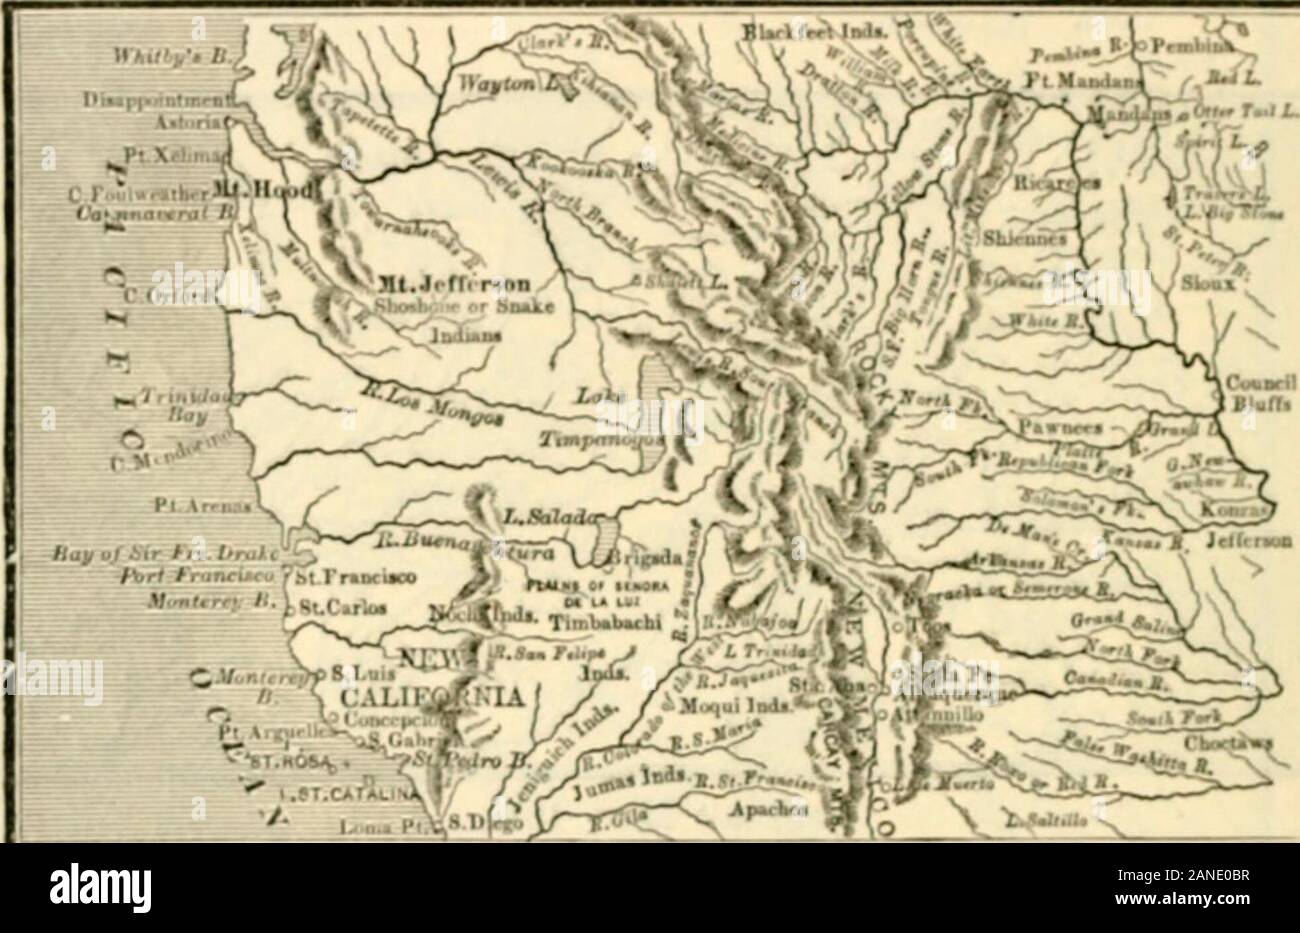 History of Nevada, Colorado, and Wyoming, 1540-1888 . in French. Book ii. contains numerous maps,with a brief description of the countries, fourteenlines being devoted to California. In a map of North America drawn to accompanyWinterbothams history, published in New York 1795,Nevada is a blank save the delineation of a streamwith its tributaries flowing eastward into a namelesslake, presumbably Great Salt Lake, the three townsof Axaas, Bagopas, and Quivira, and a section of Hist. Nev. 3 34 EARLIEST EXPLORATIONS. the Sierra Xevada from (»j&gt;poHite San Francisco Baysouthward towanl Lower Calif Stock Photo